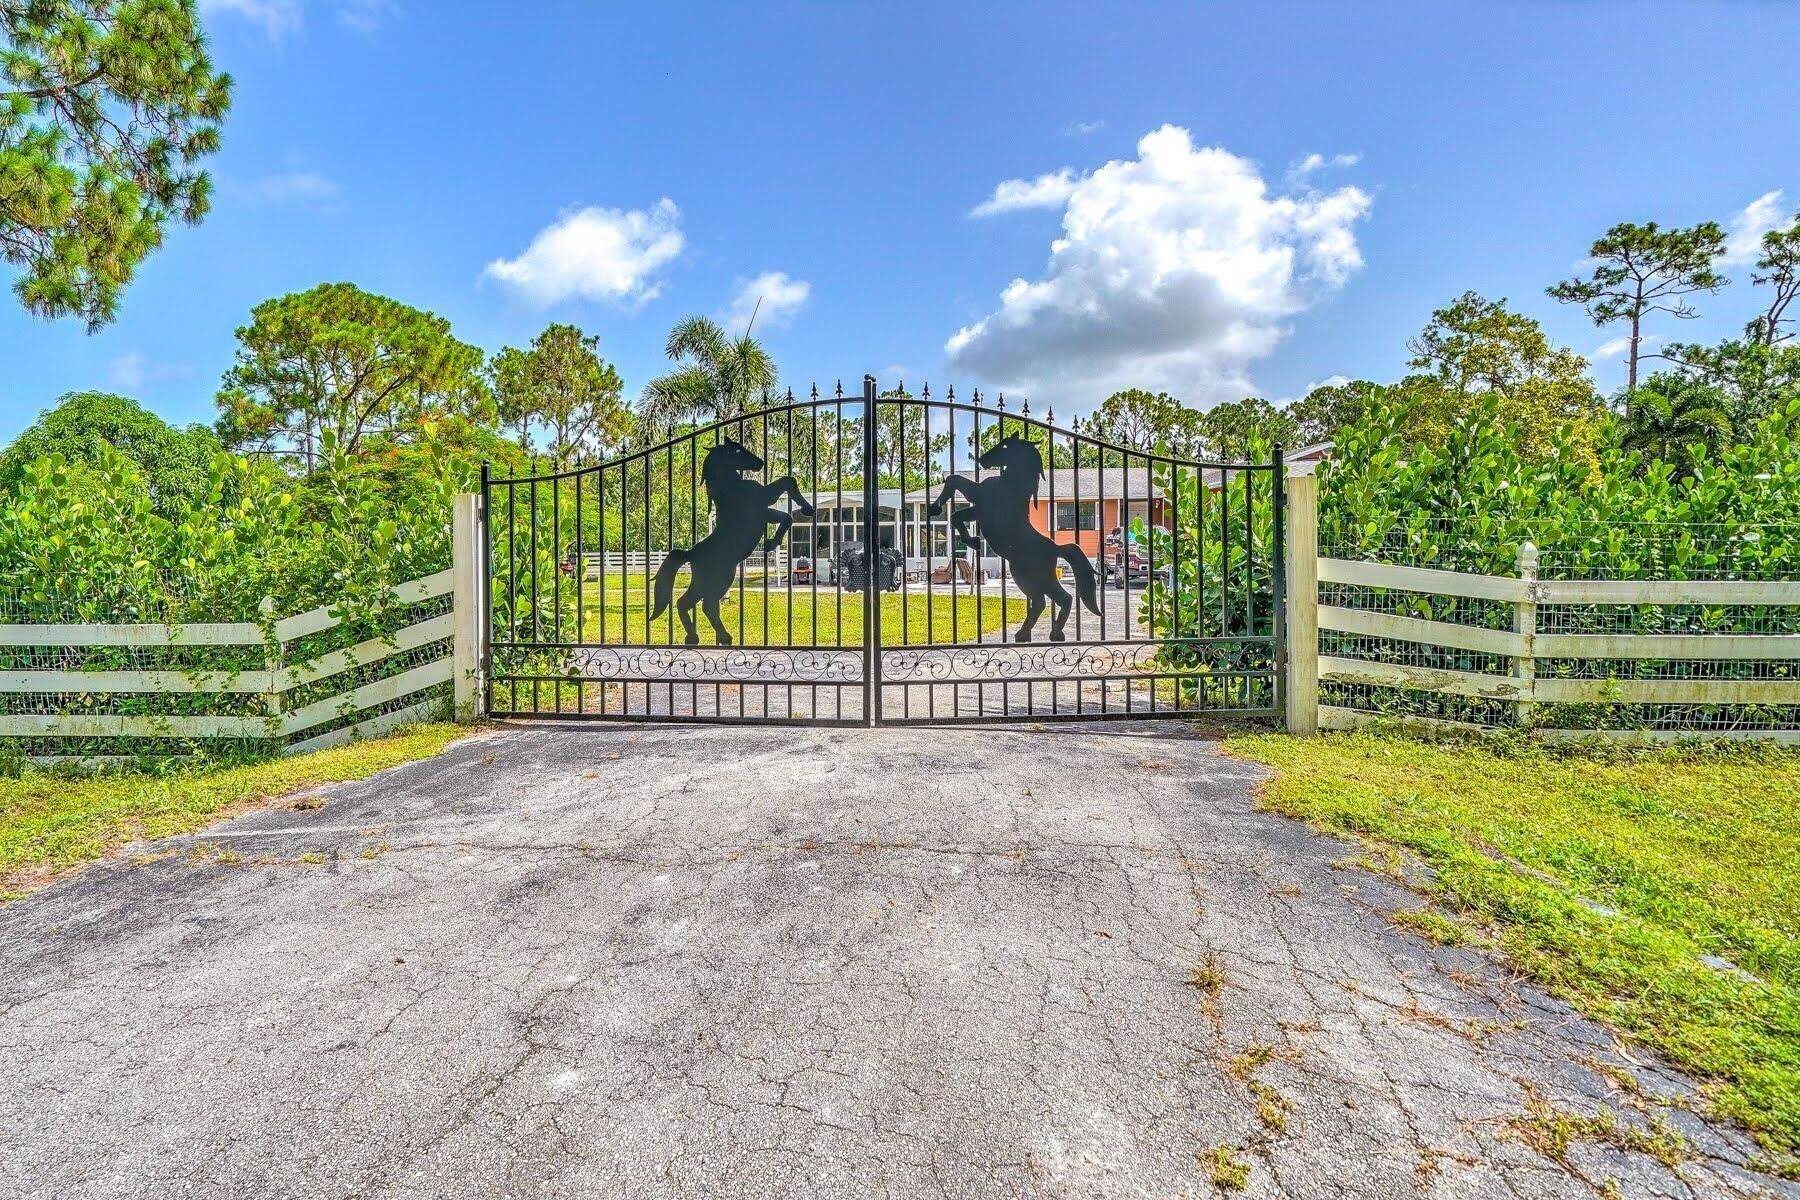 PRICE REDUCED FOR FAST SALE 4 Bed, 2 Bath Home on Over 1 Acre in Loxahatchee This stunning 4 bed, 2 bath single family home is a true equestrian paradise ...